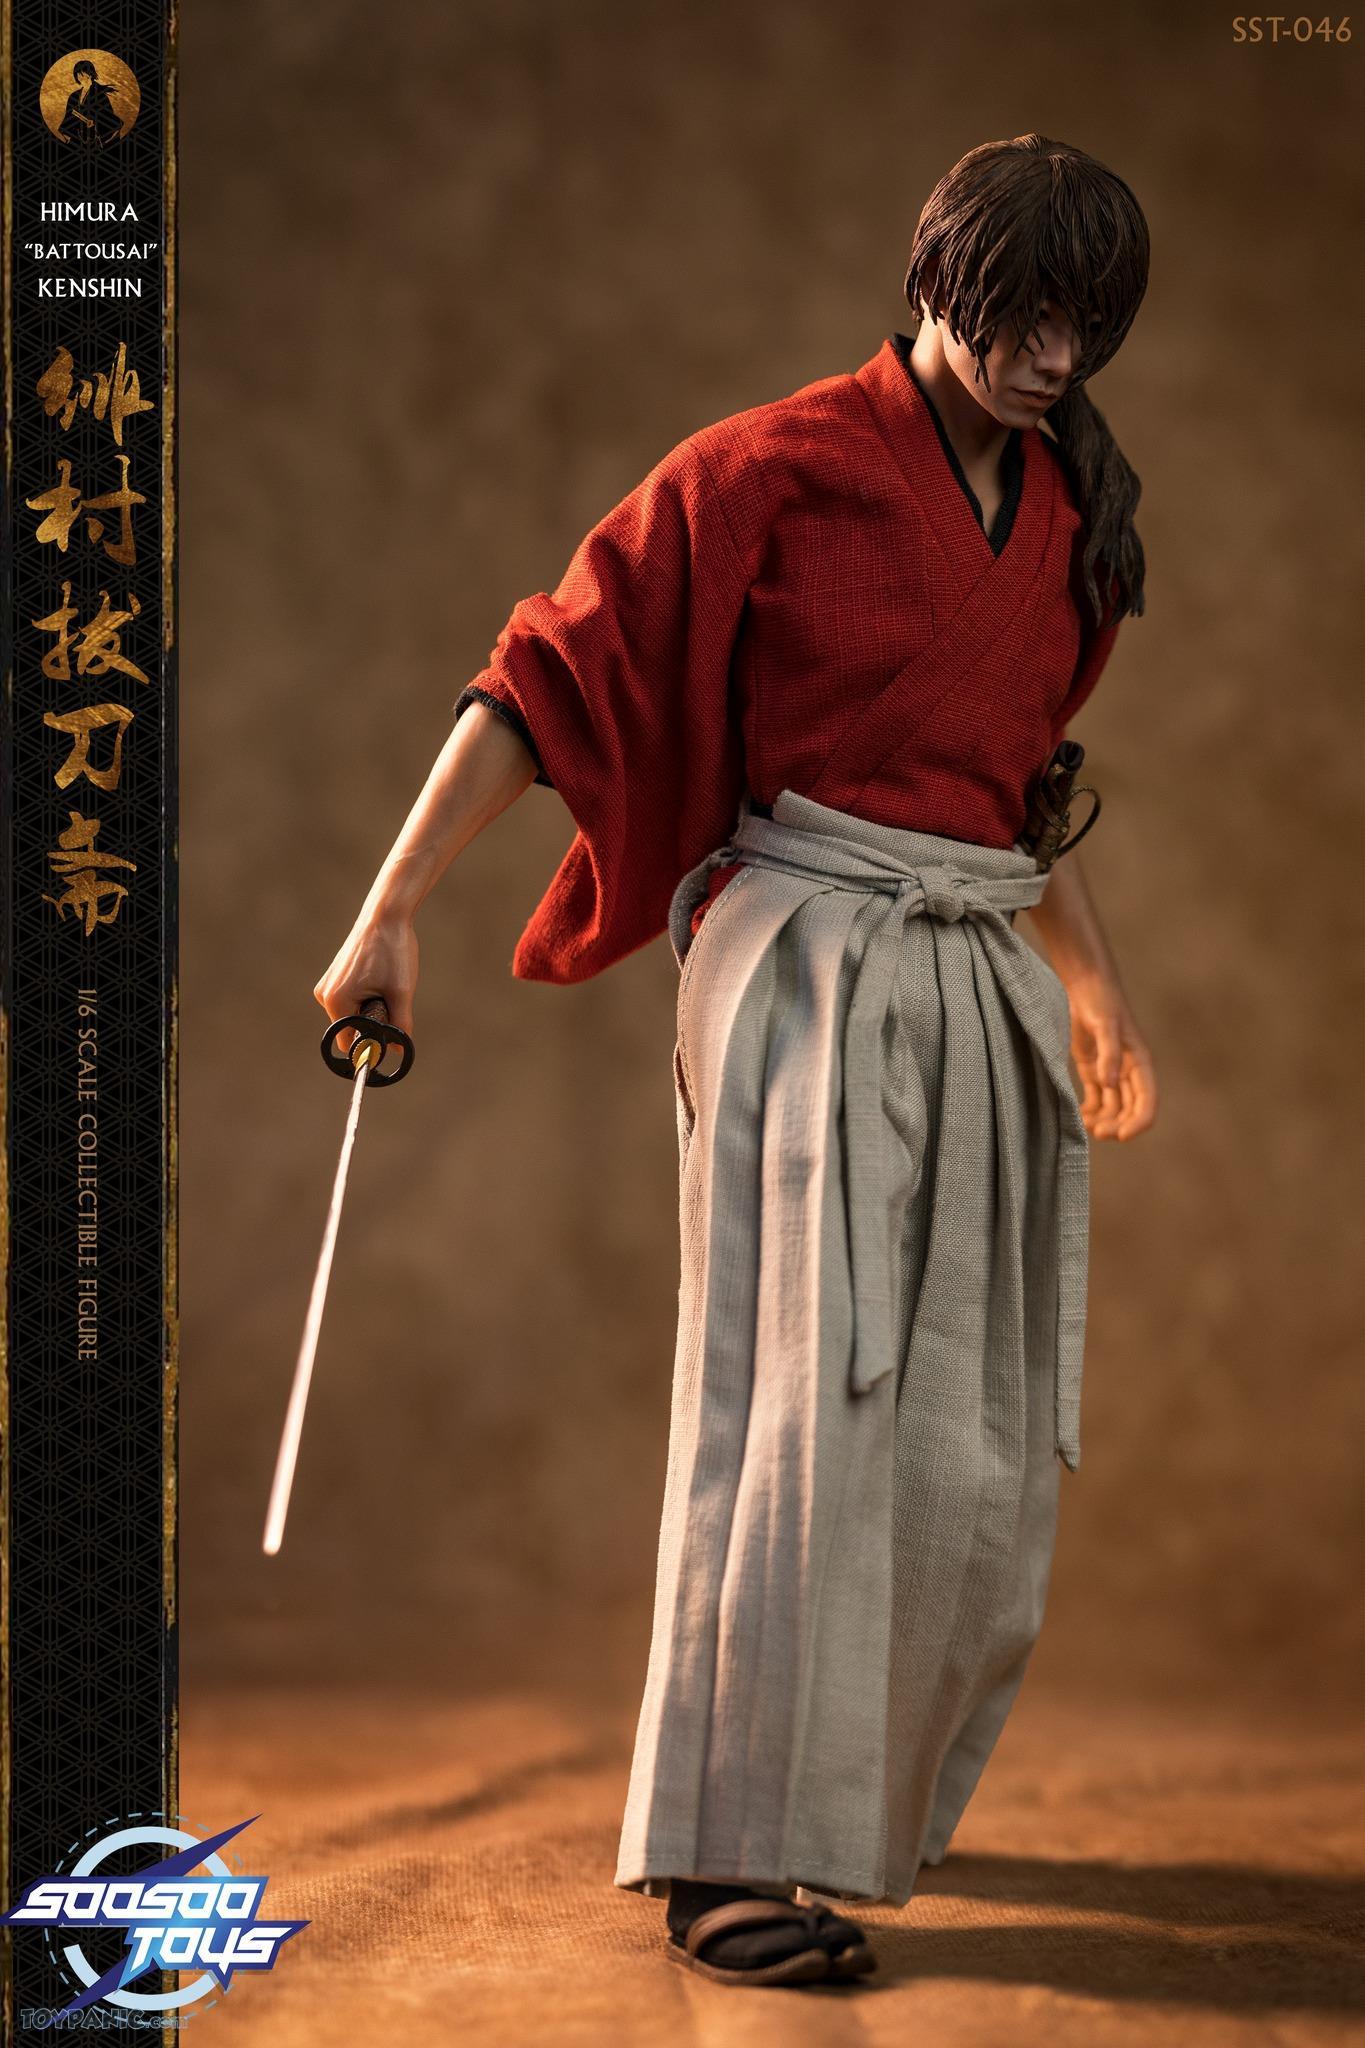 Japanese - NEW PRODUCT: 1/6 scale Rurouni Kenshin Collectible Figure from SooSooToys 712202251231PM_223060